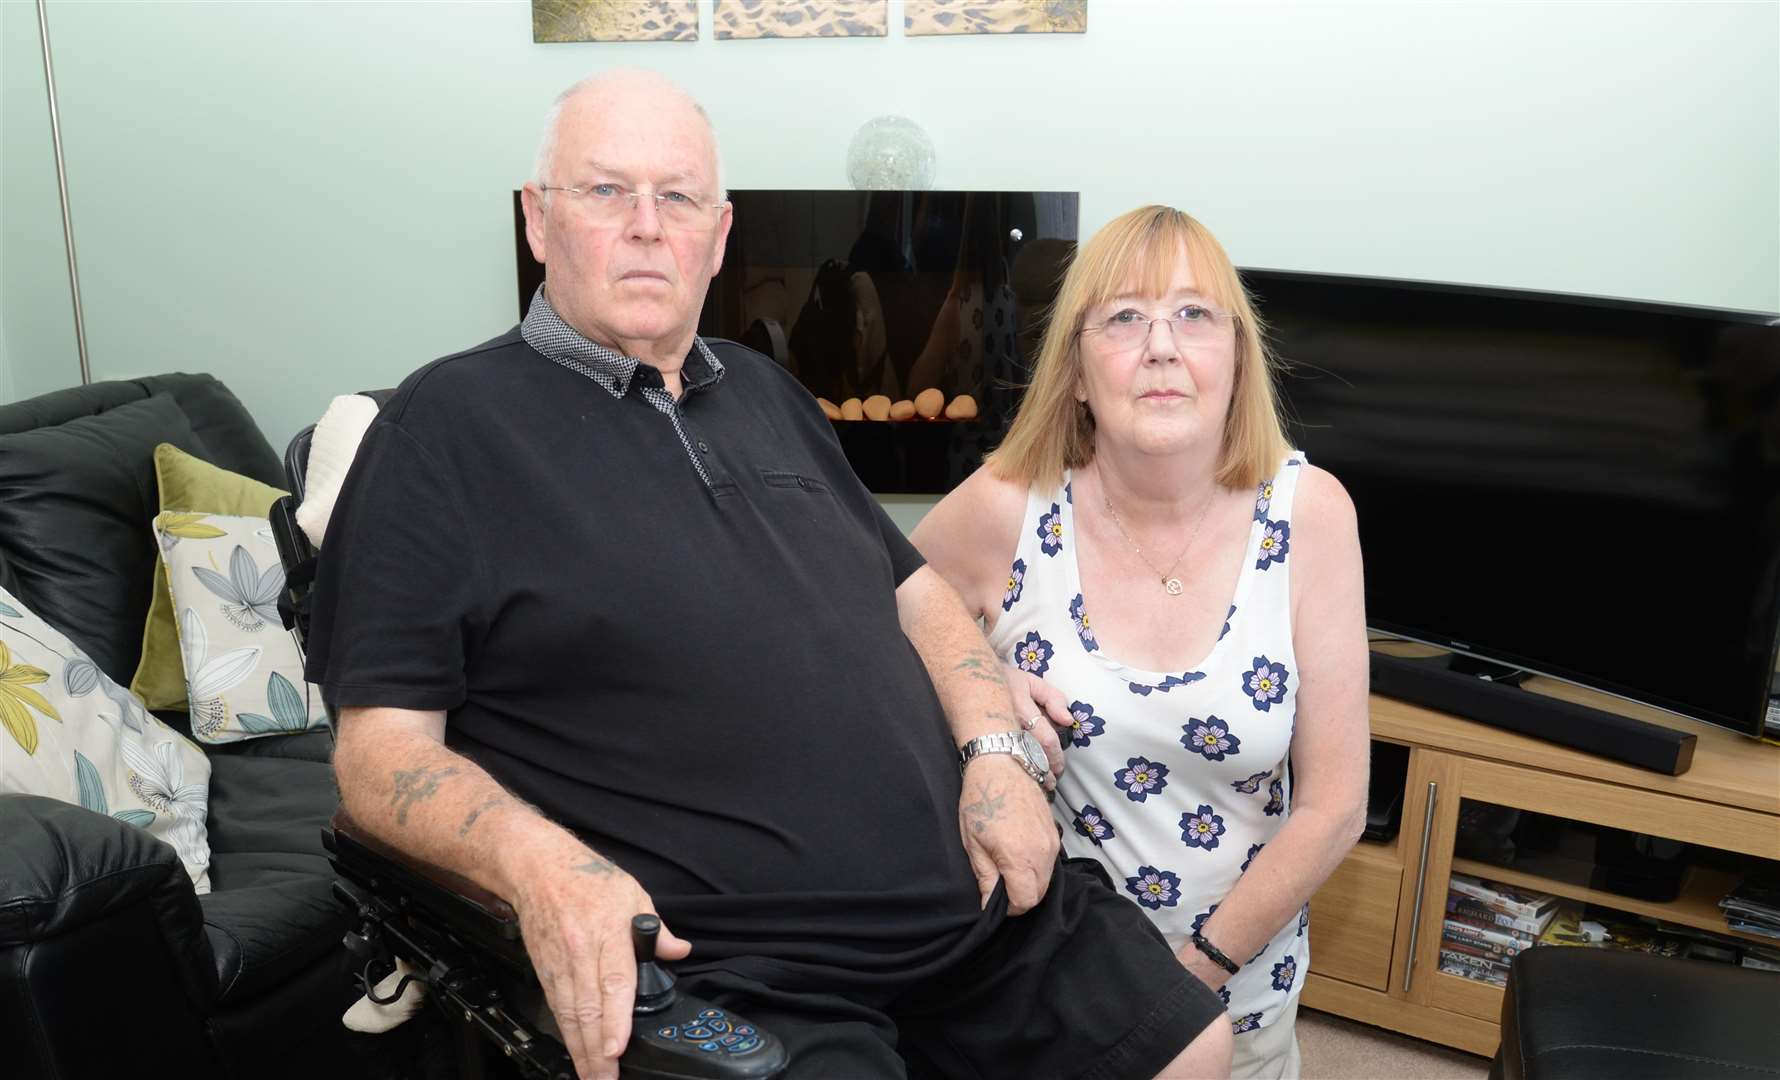 David Slater and his wife Marion at their home in Rainham